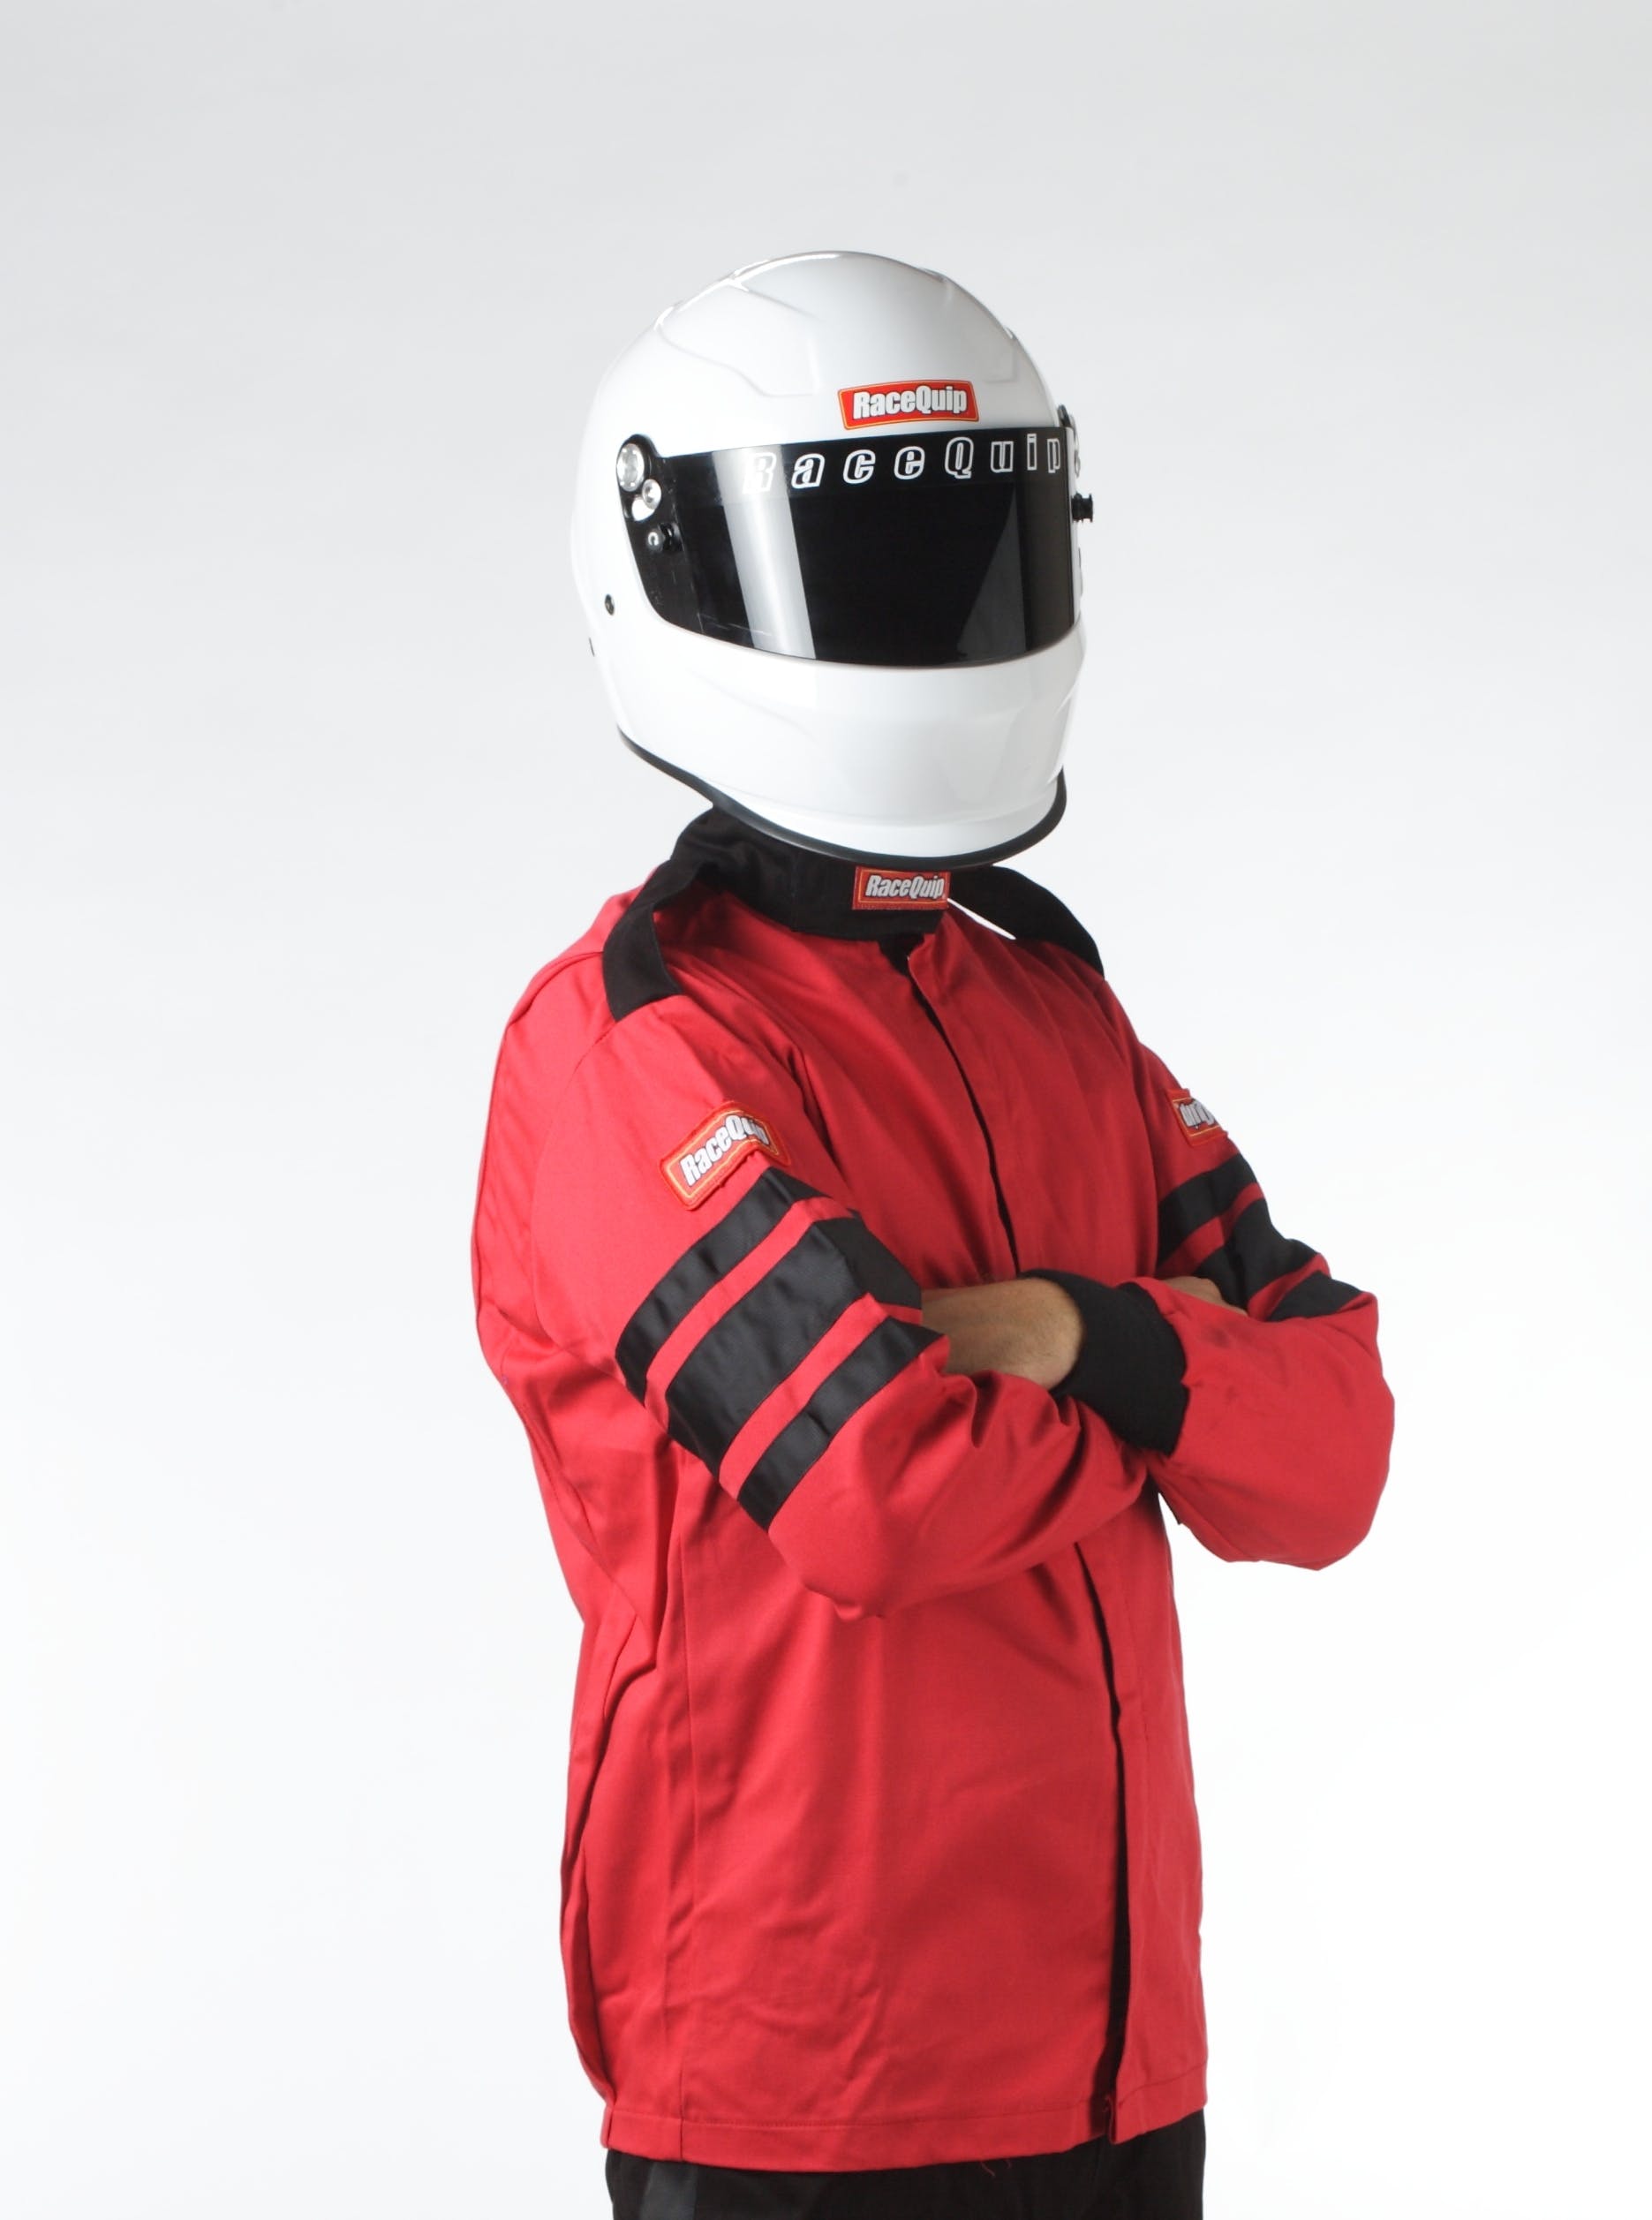 RaceQuip 111015 SFI-1 Pyrovatex Single-Layer Racing Fire Jacket (Red, Large)